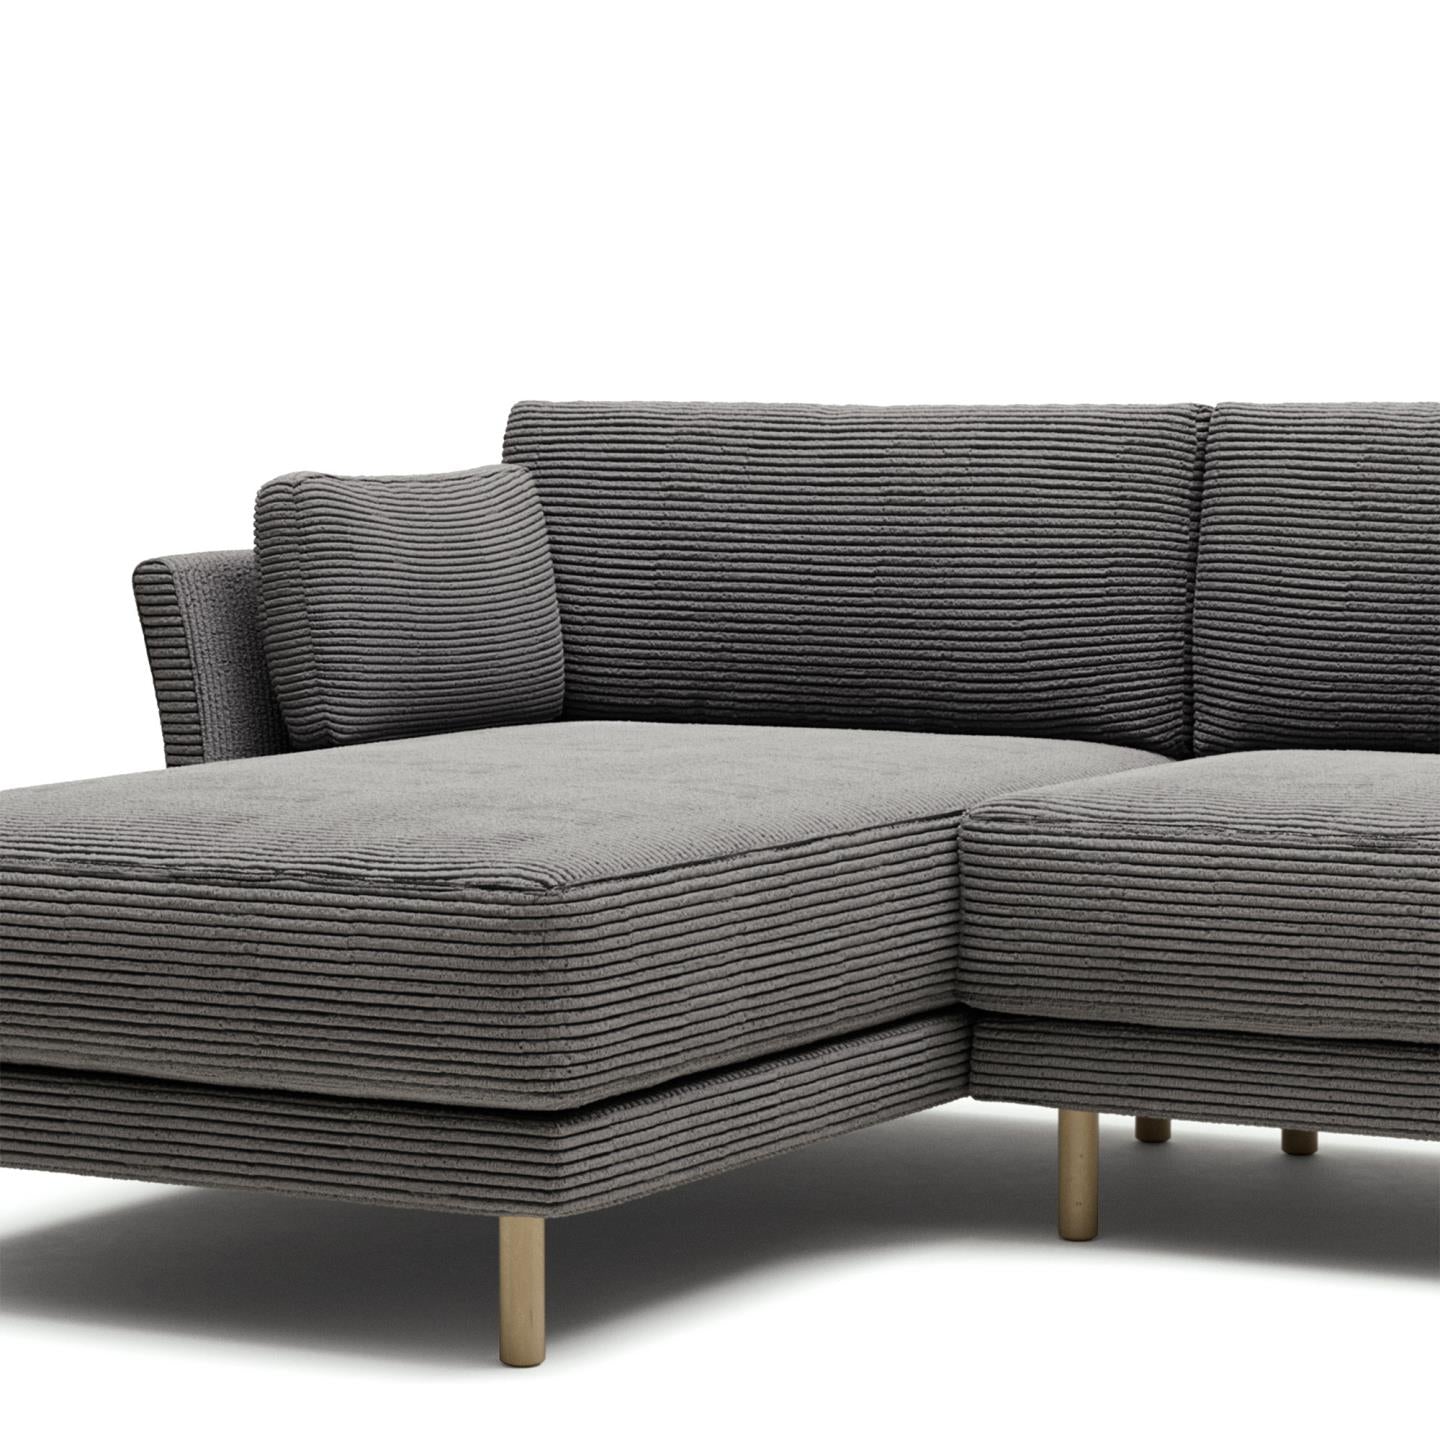 Sofia 3 Seater Sofa with Left/Right Side Chaise - Grey Corduroy